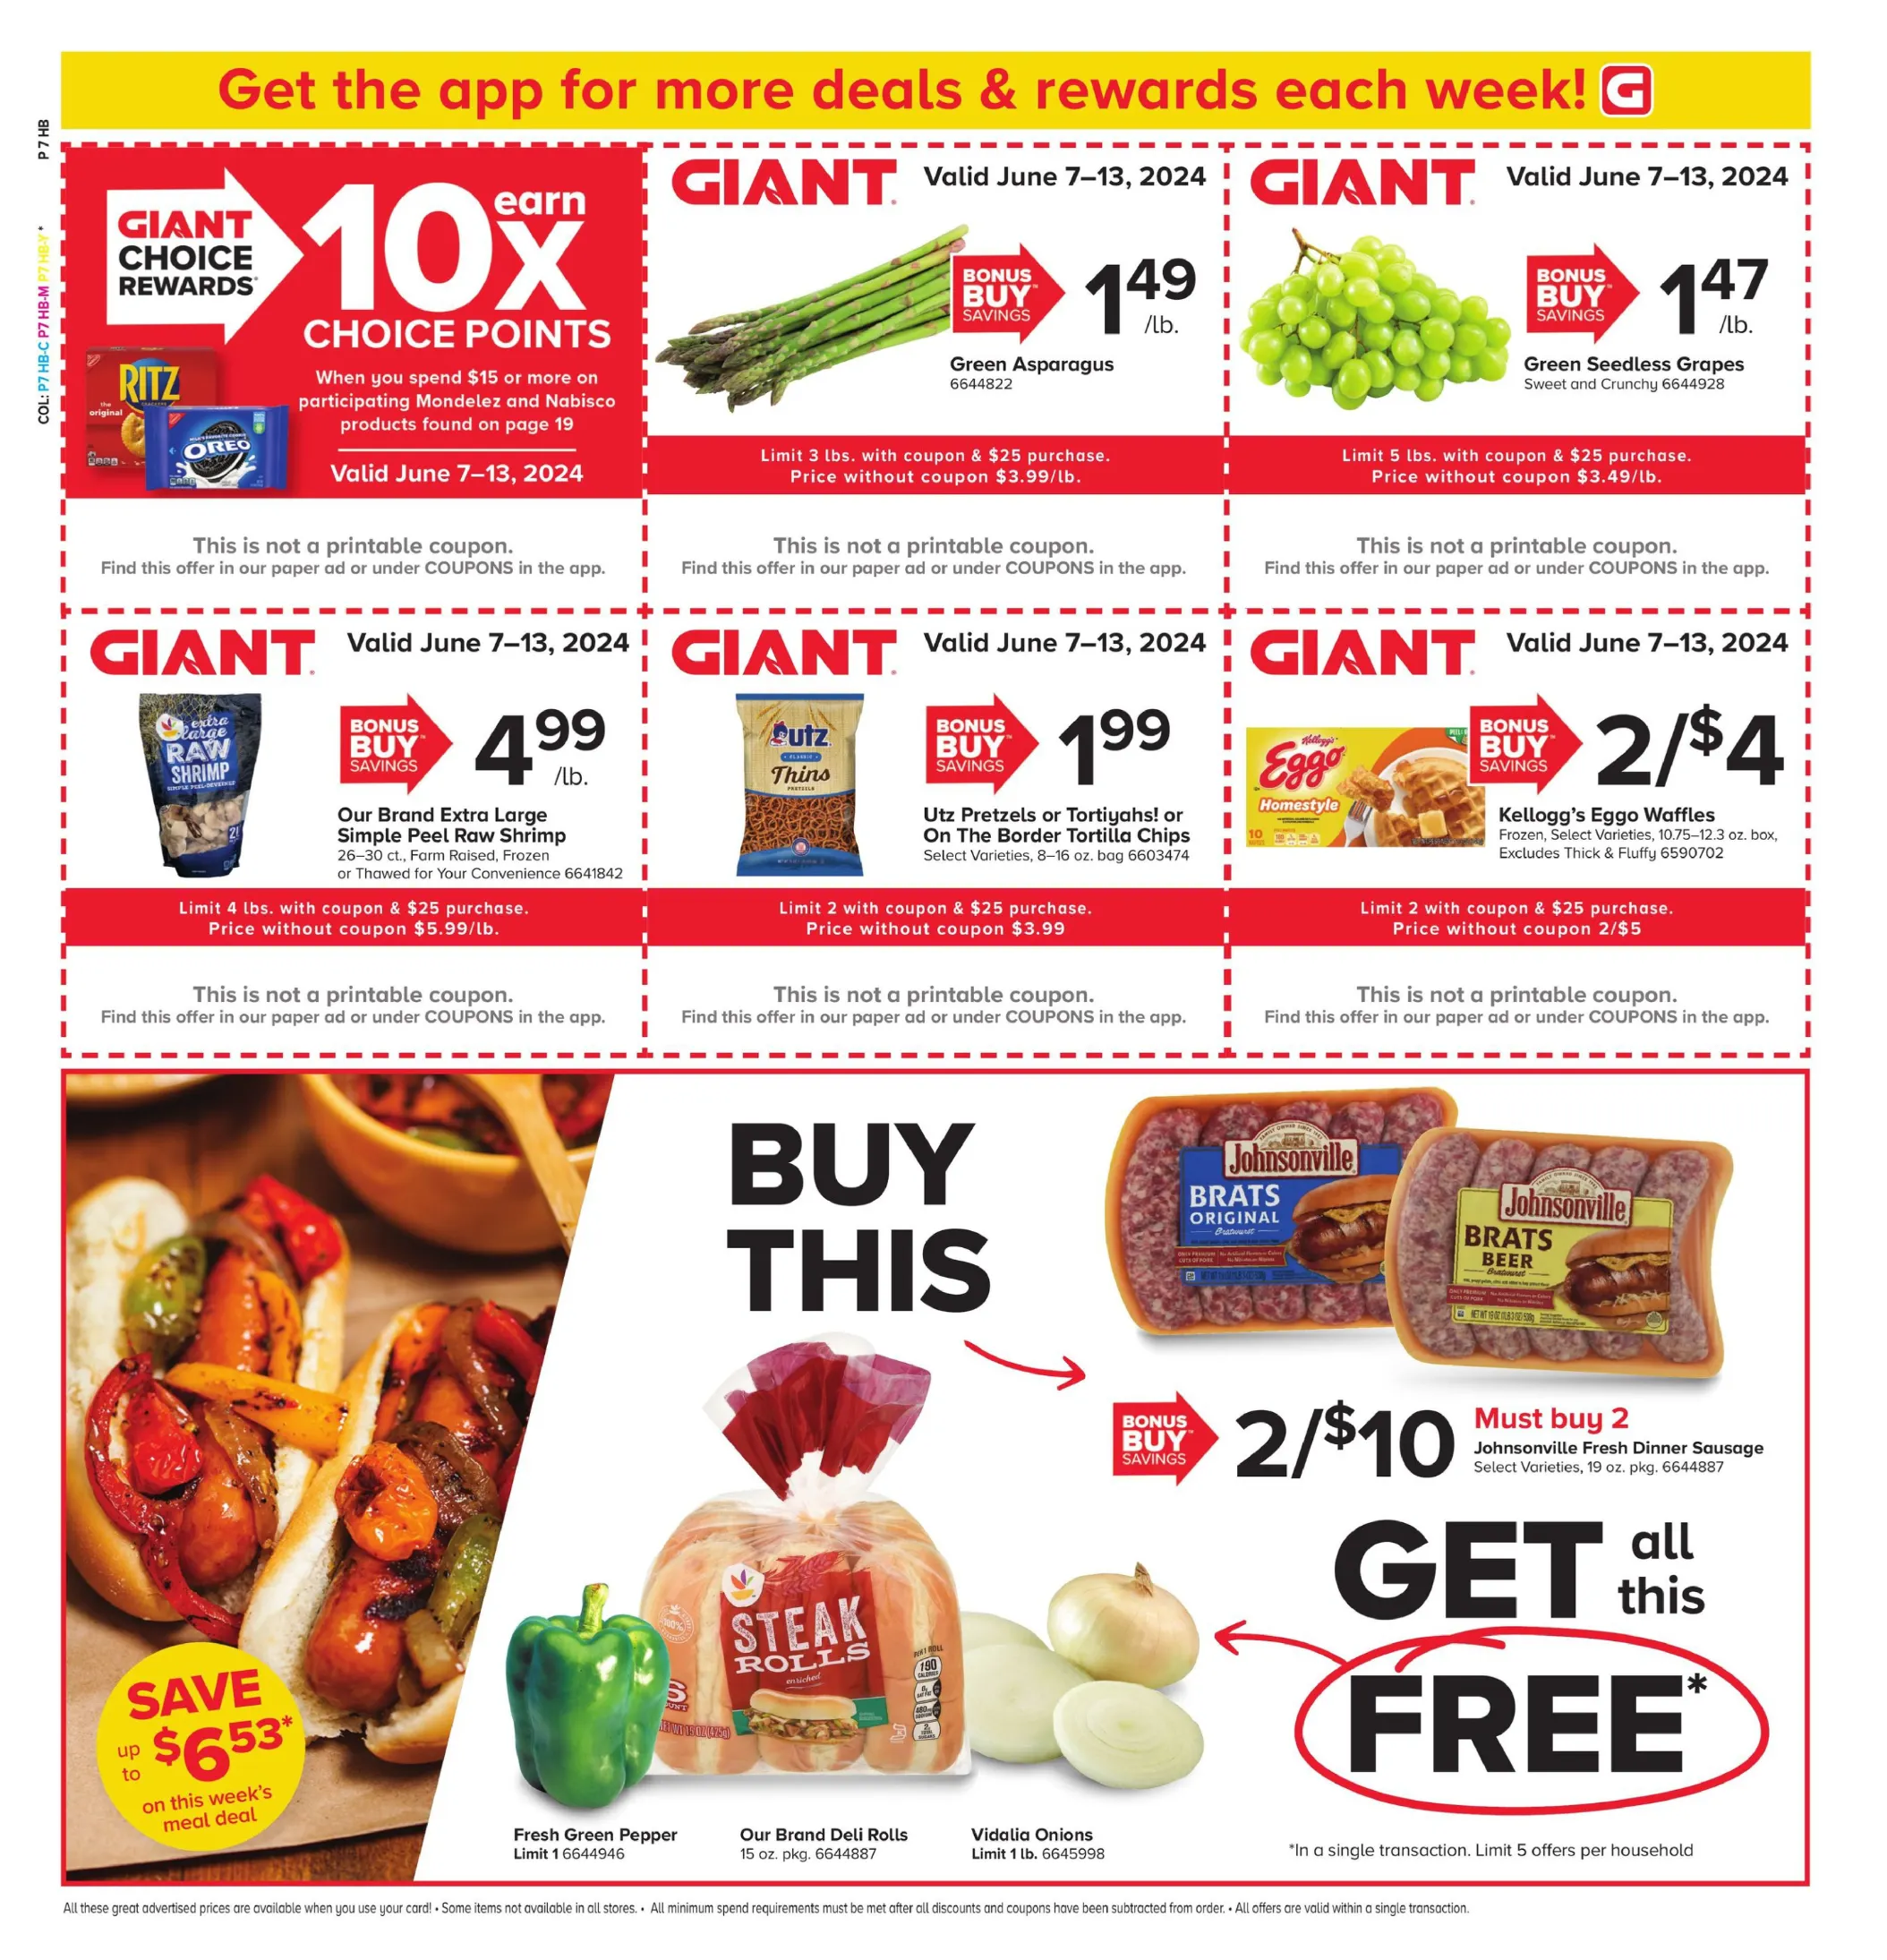 Giant July 2024 Weekly Sales, Deals, Discounts and Digital Coupons.